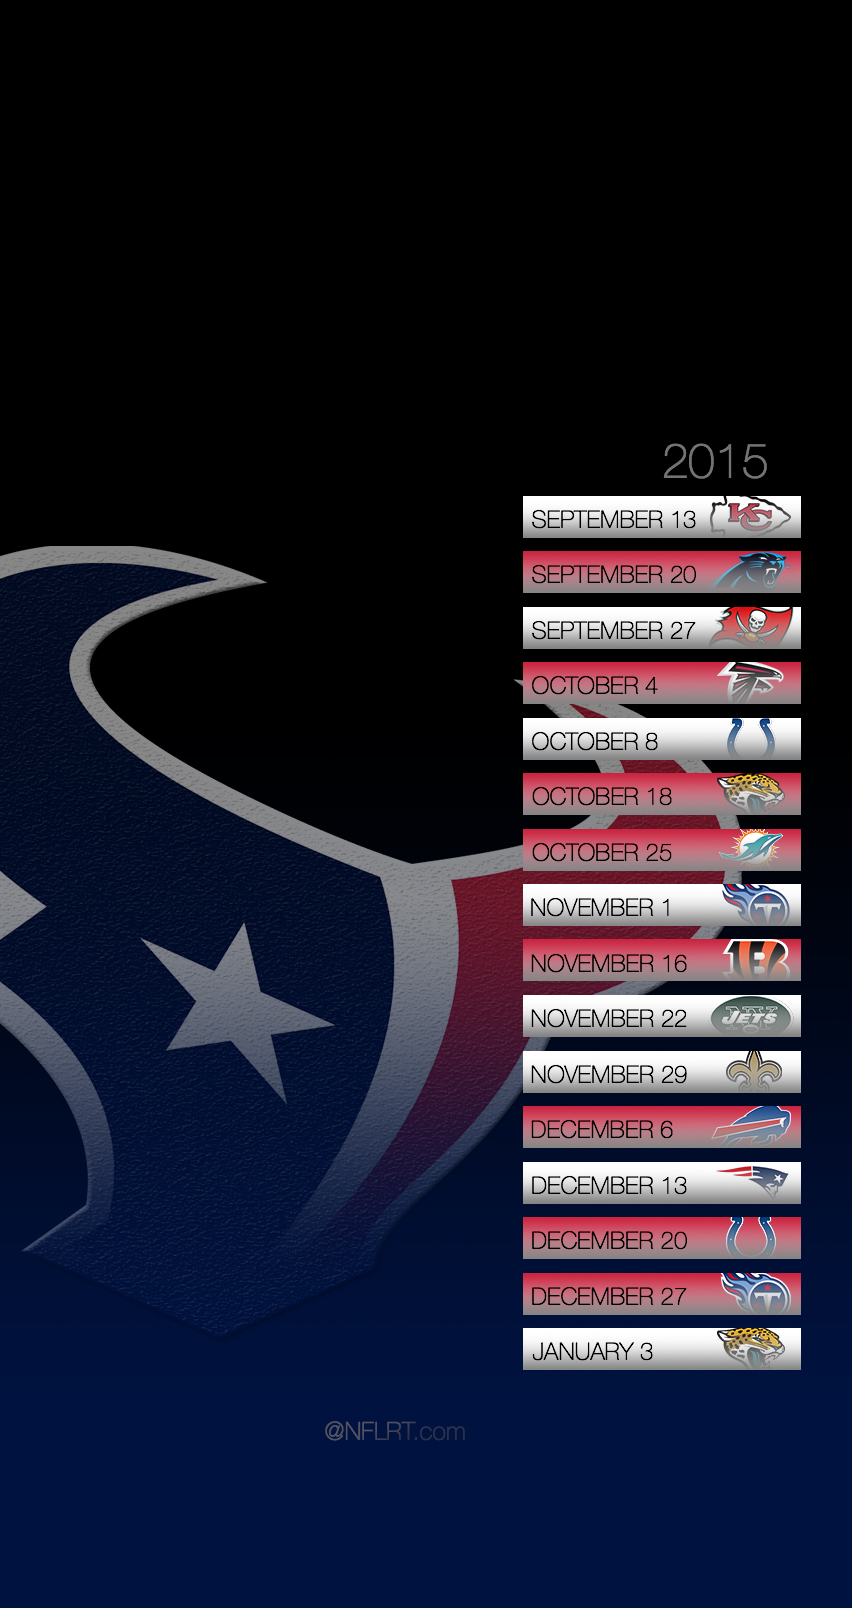 2015 NFL Schedule Wallpapers   Page 5 of 8   NFLRT